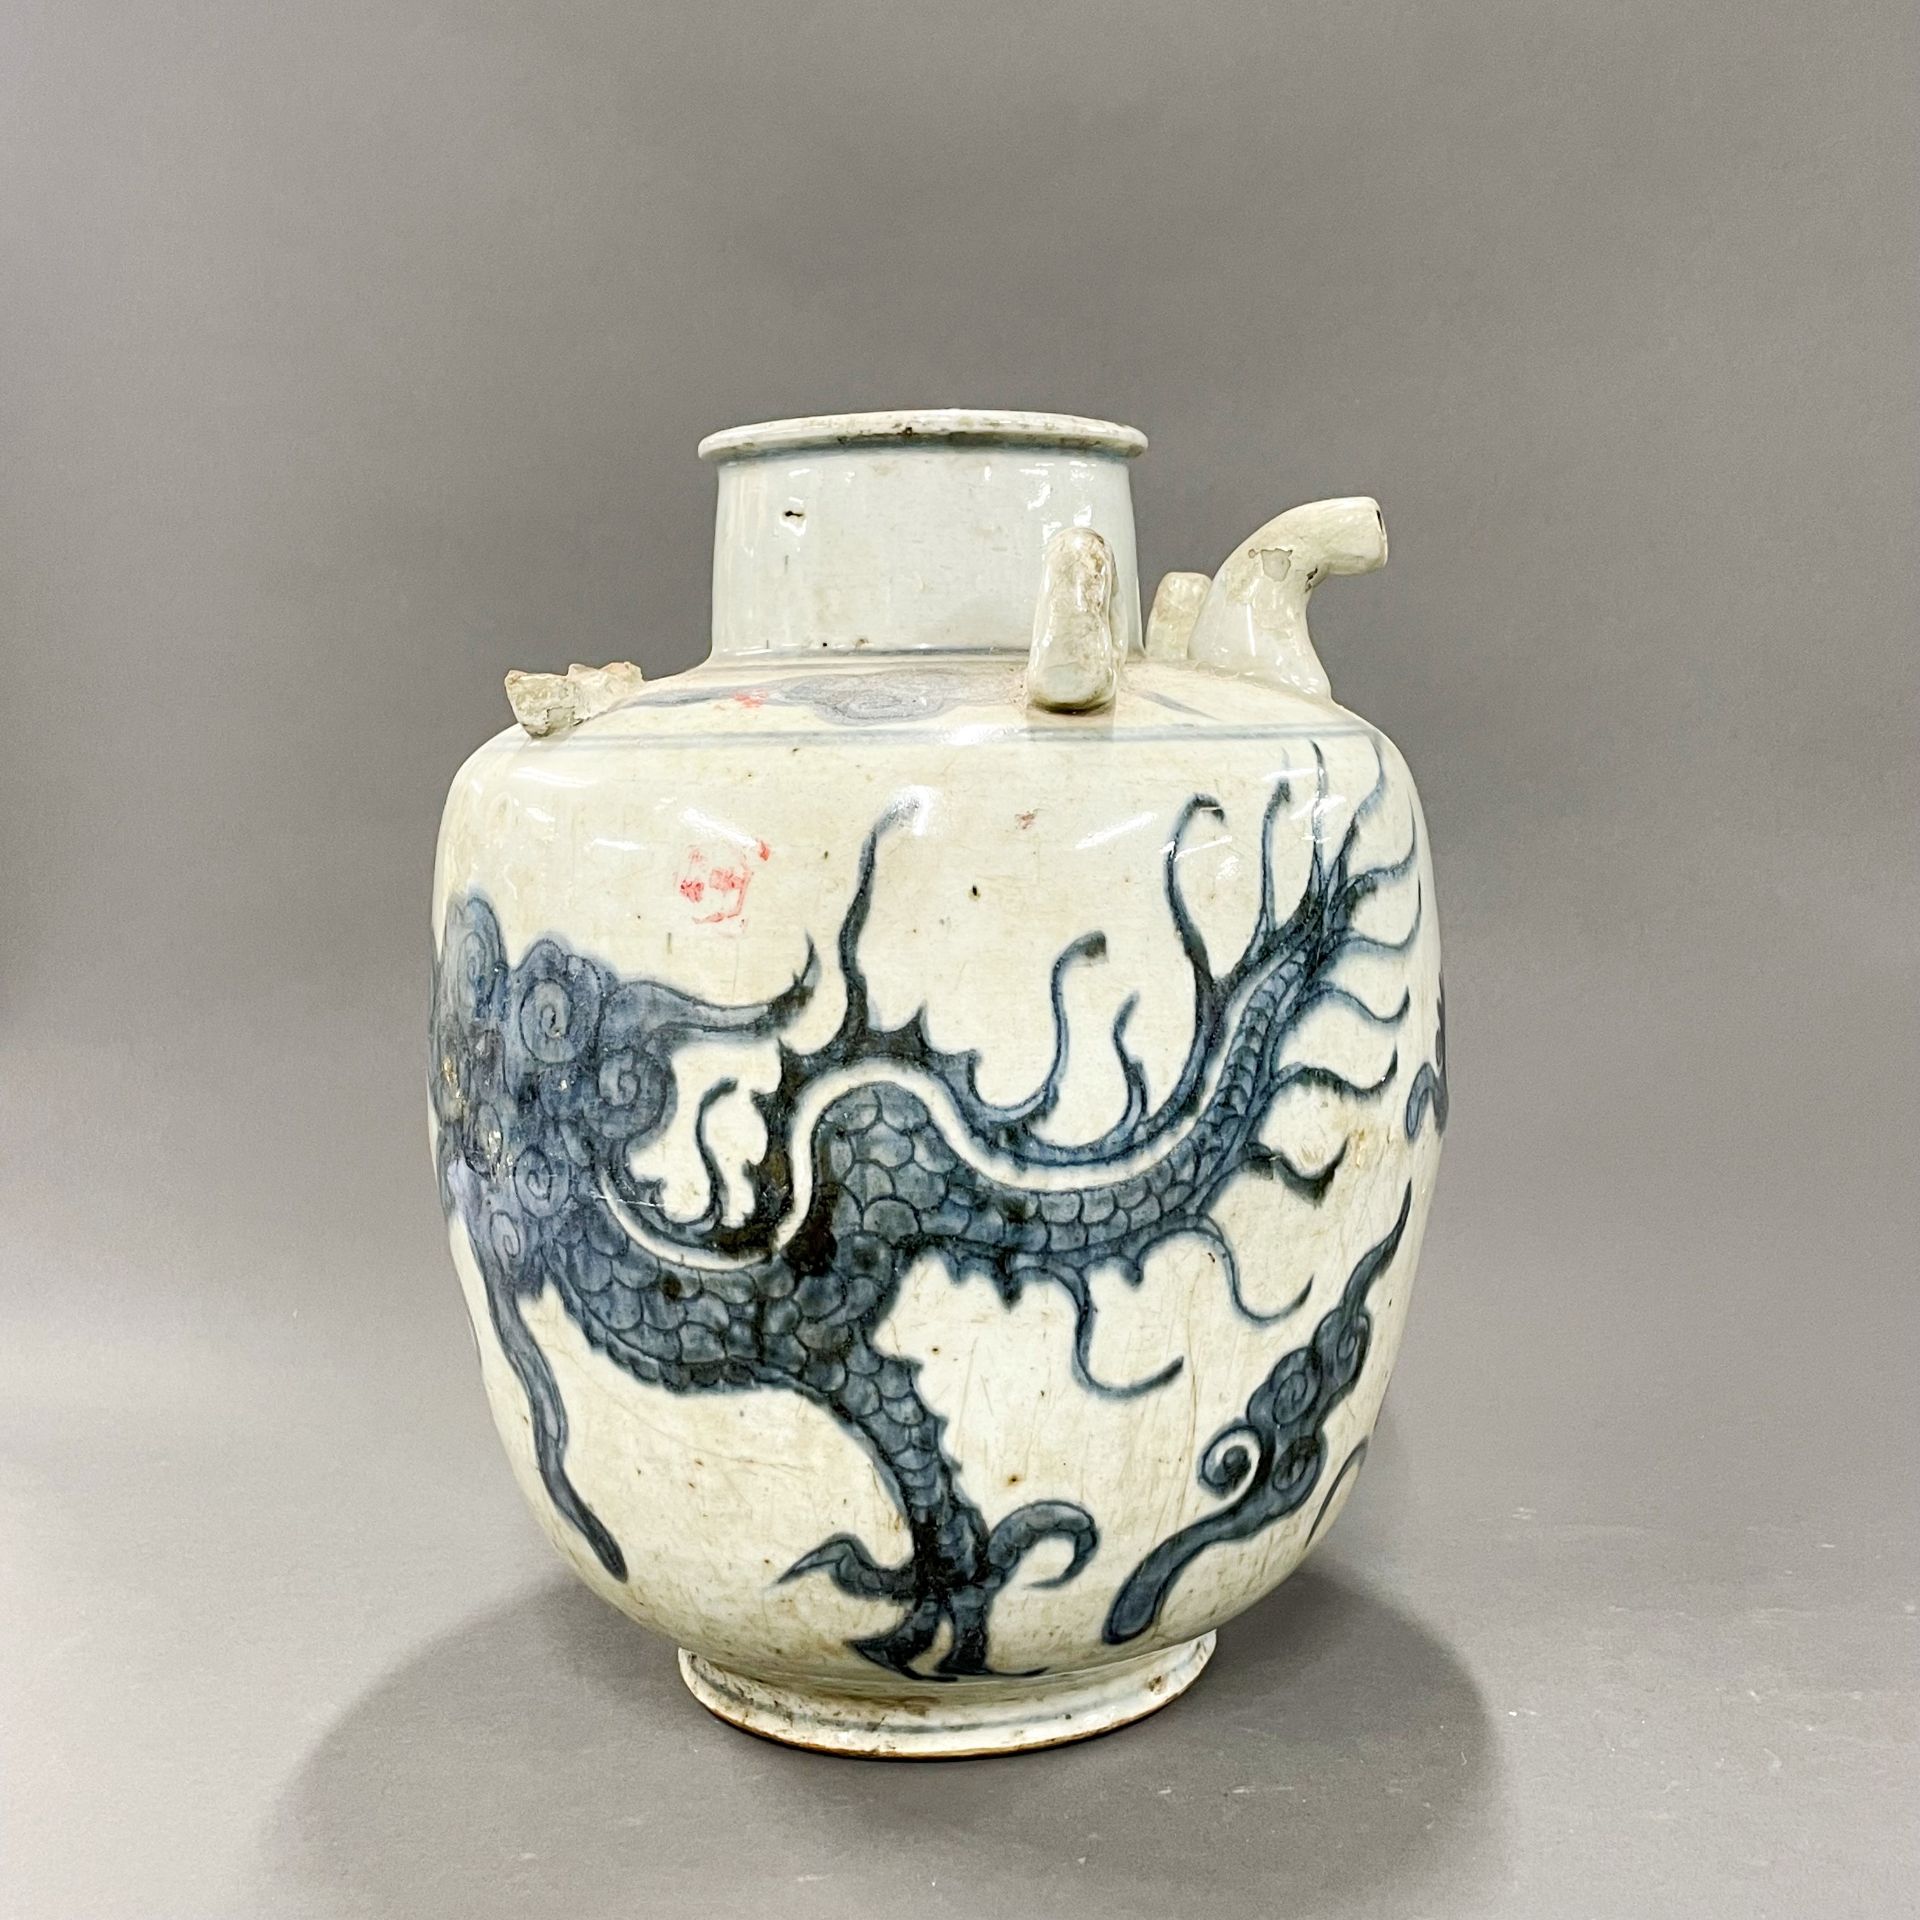 A large early Chinese hand painted provincial porcelain wine jar, H. 31cm. Some restoration and